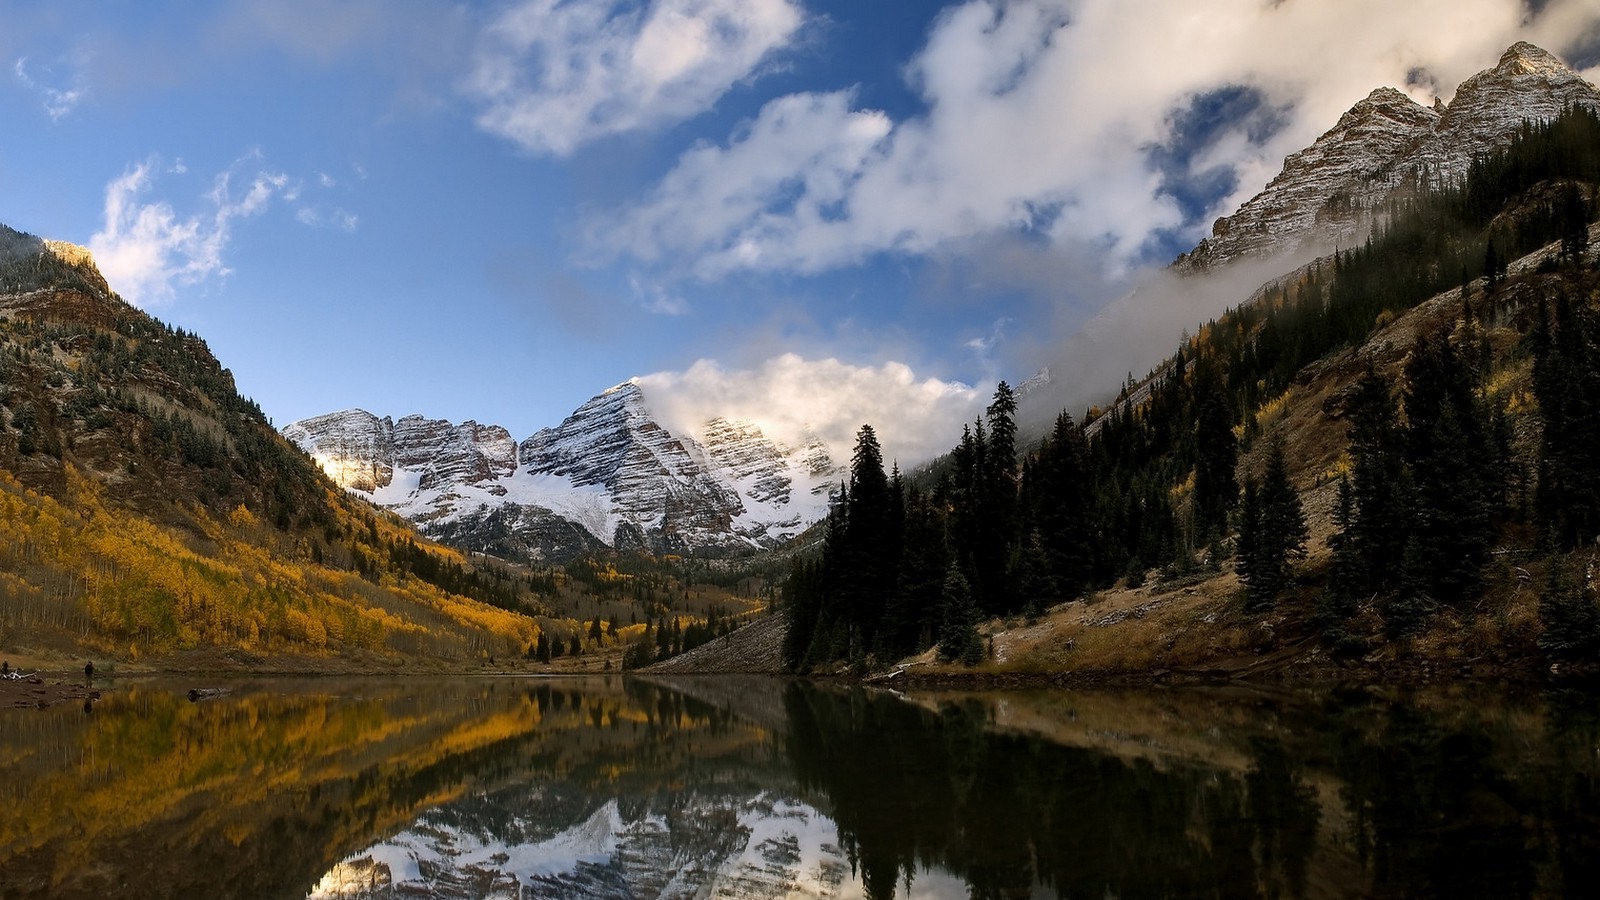 nature, Landscape, Lake, Mountain, Forest, Mist, Fall, Morning, Snowy Peak, Water, Reflection, Clouds, Colorado Wallpaper